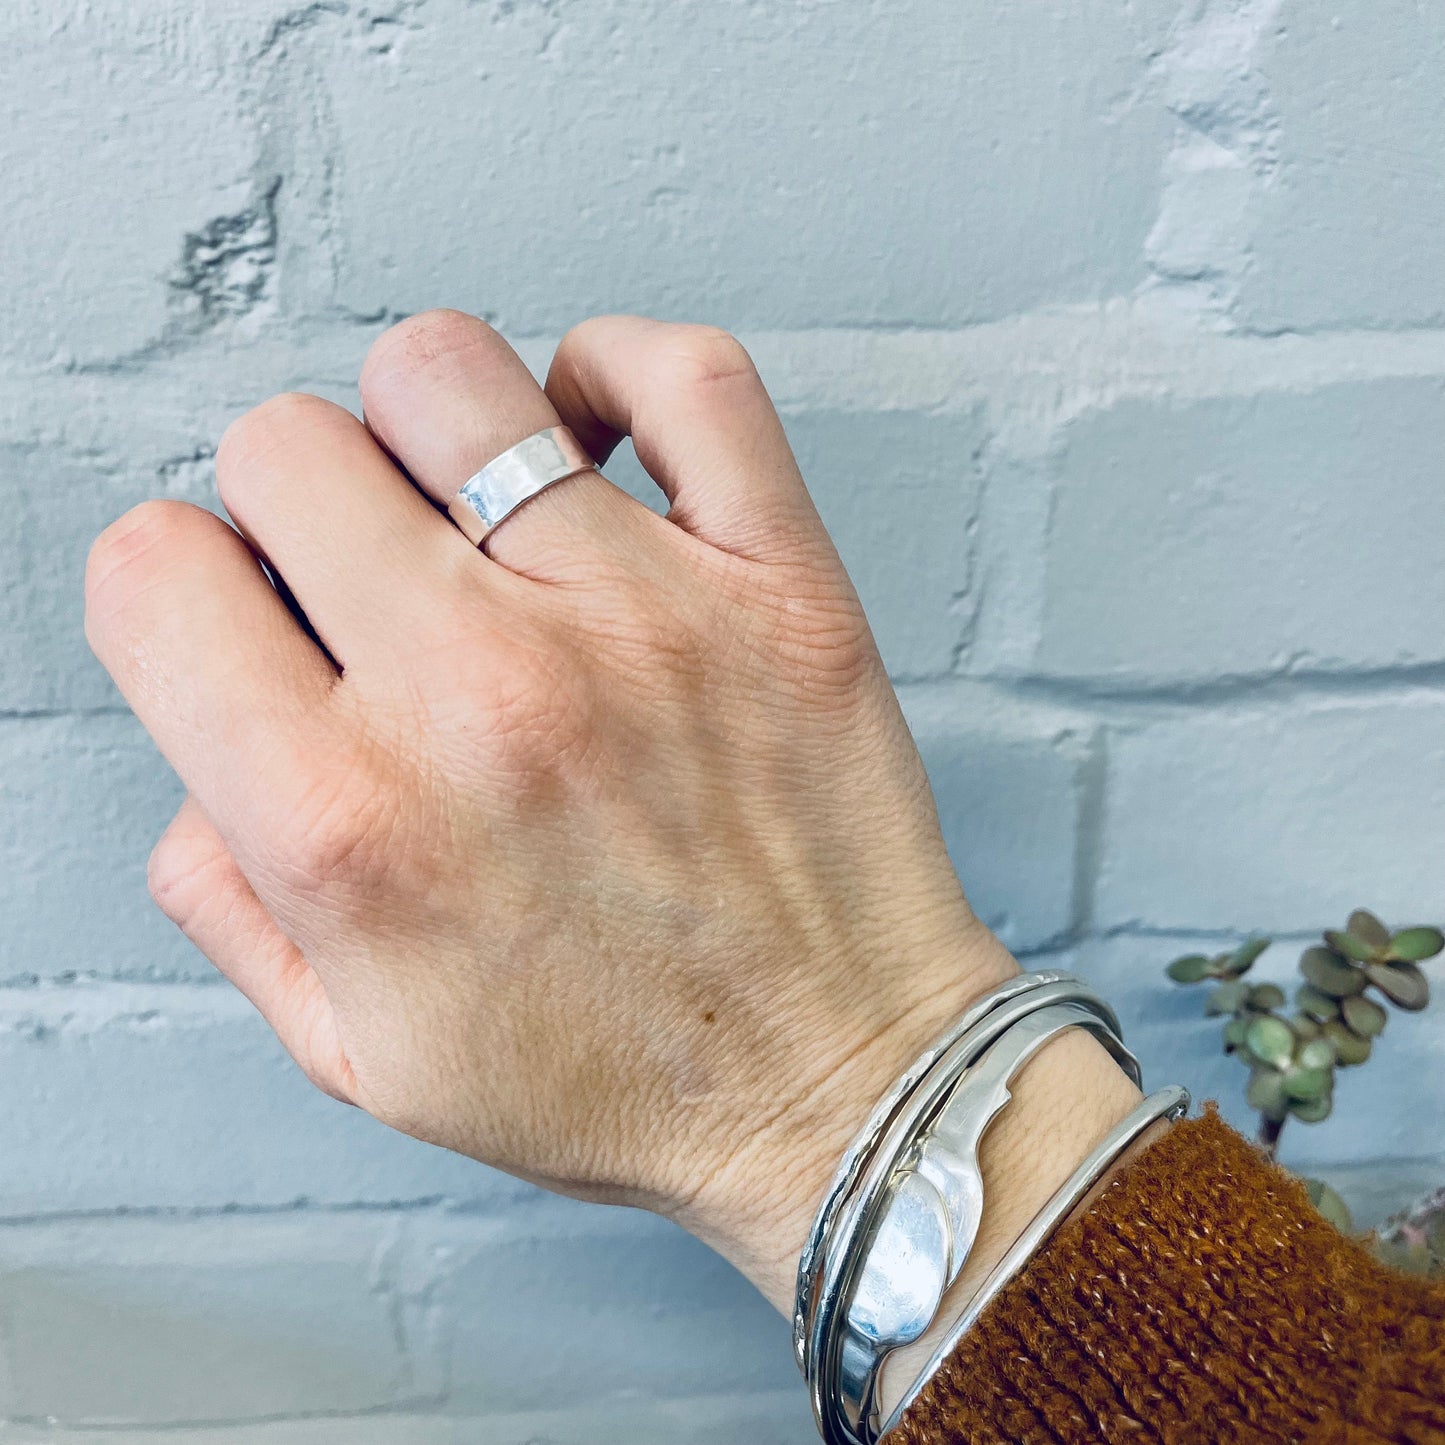 You Got This - Sterling Silver Hidden Message Ring